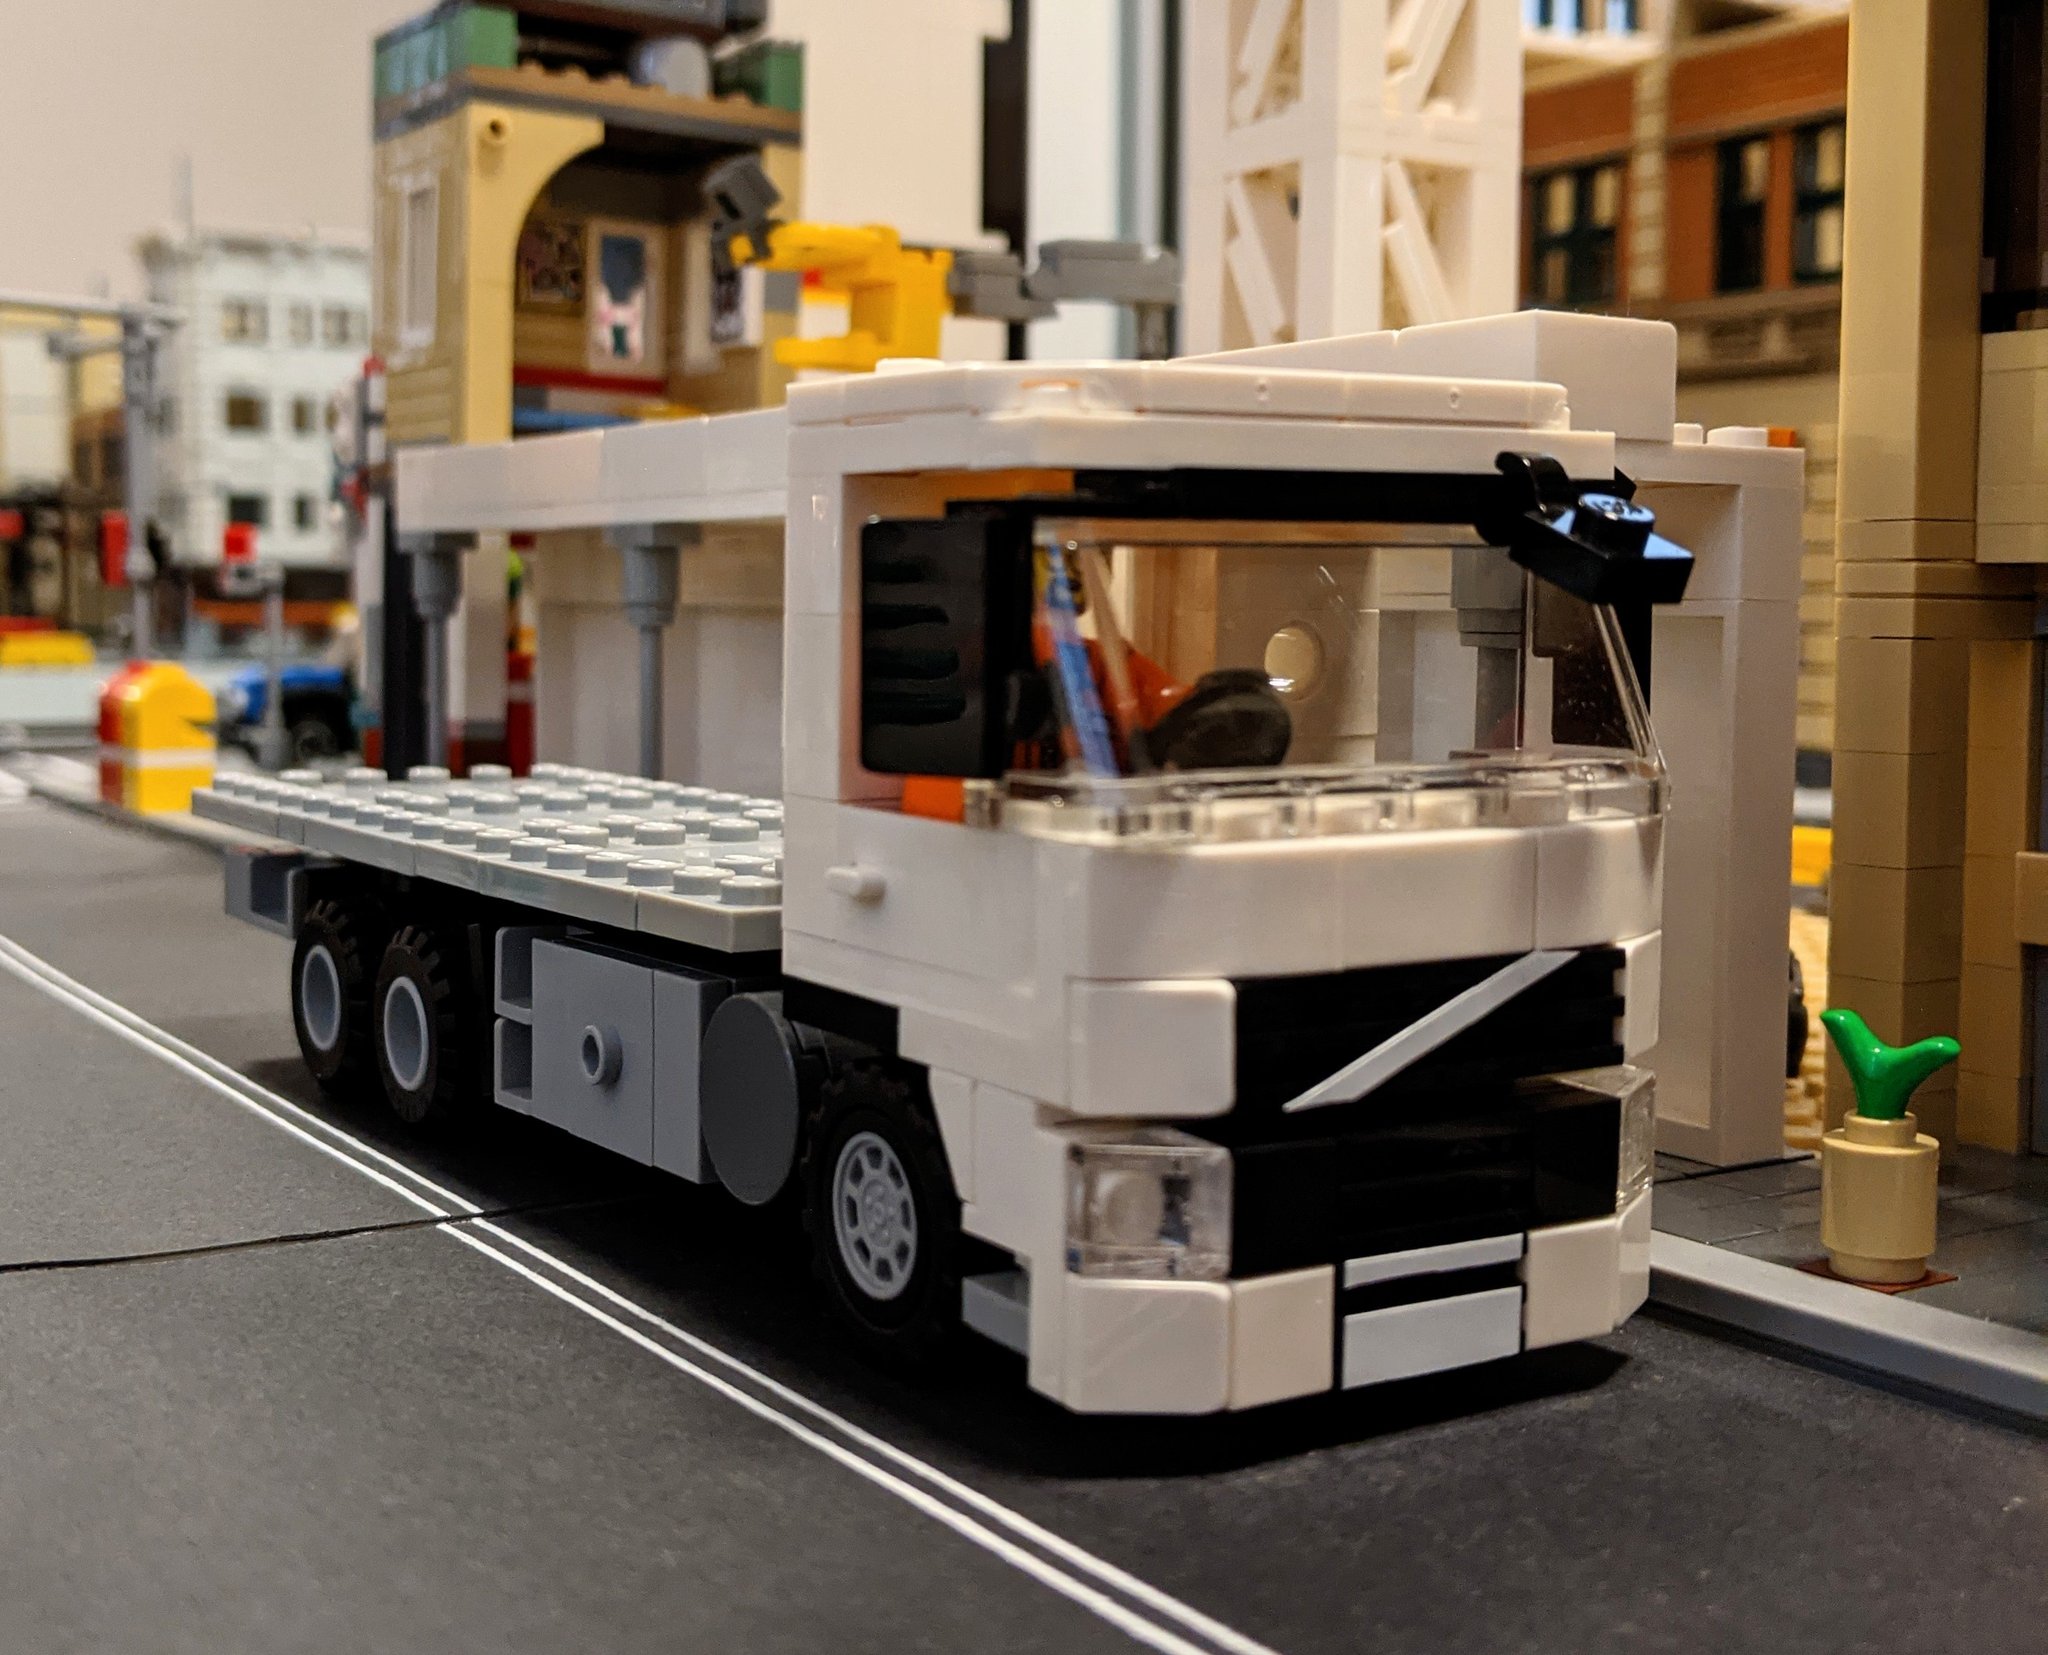 Twitter 上的 Craig Perrin："Volvo rigid truck built using my modular truck  system. The extra rear axle allows for a 17 long flatbed or box truck body.  Instructions for the modules are available